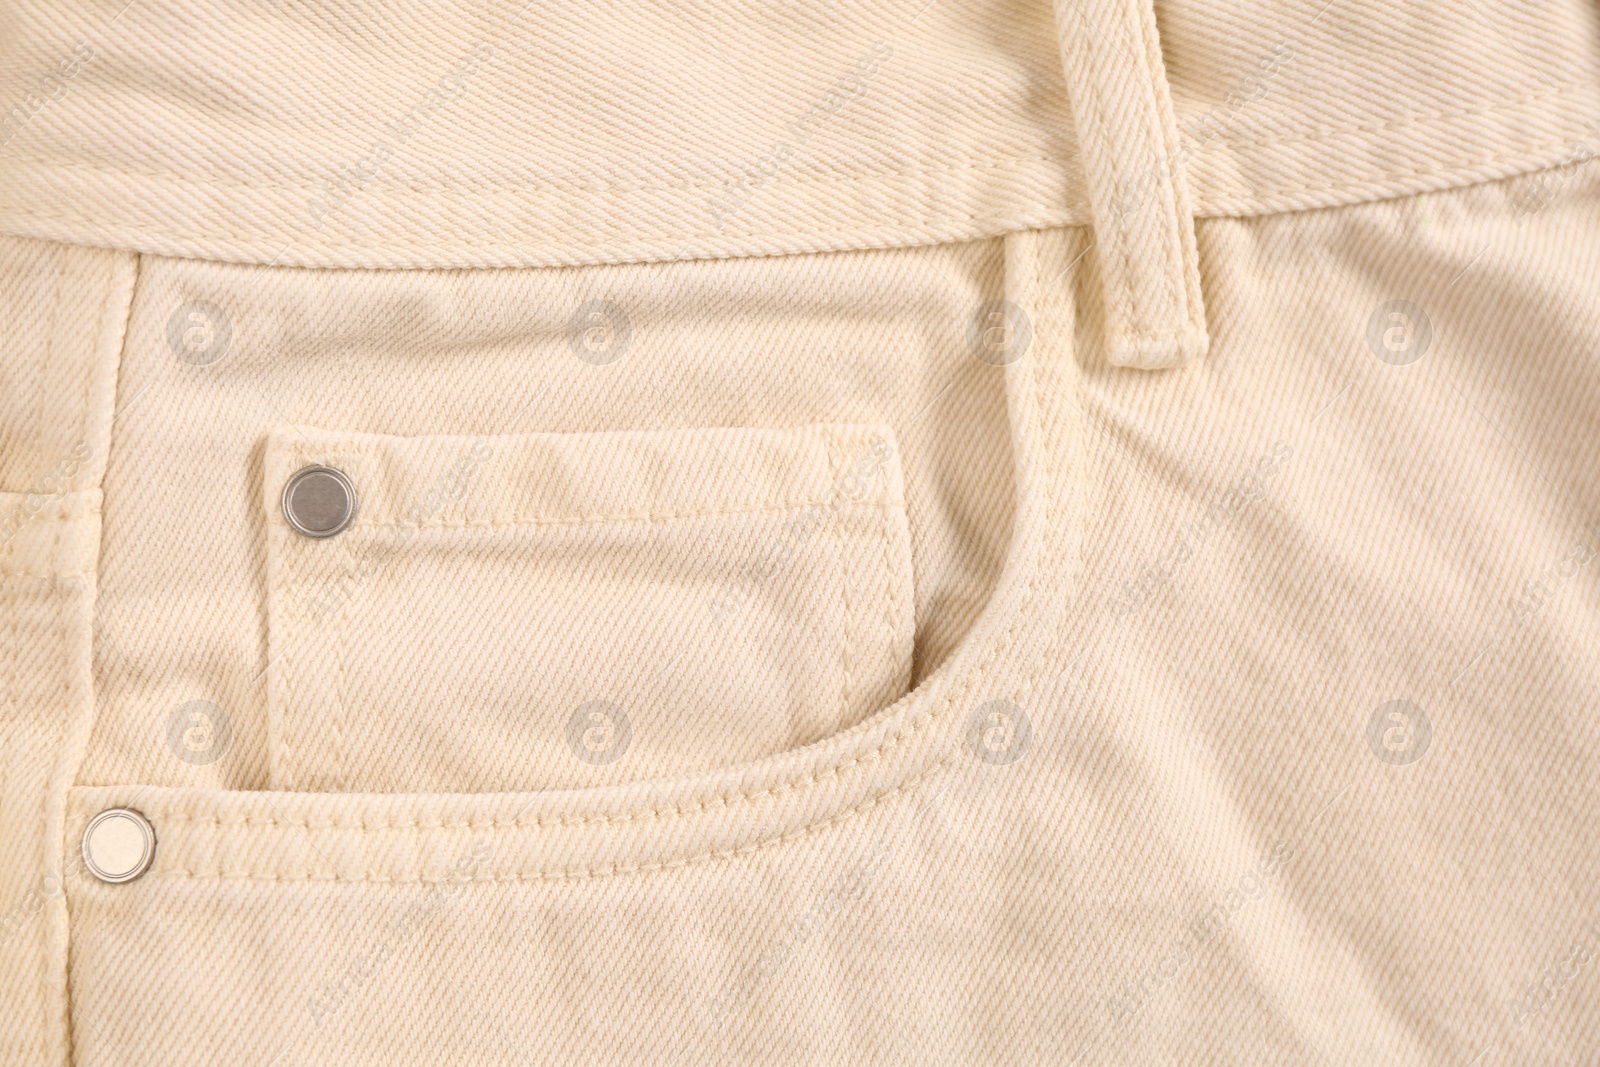 Photo of Beige jeans with inset pocket as background, closeup